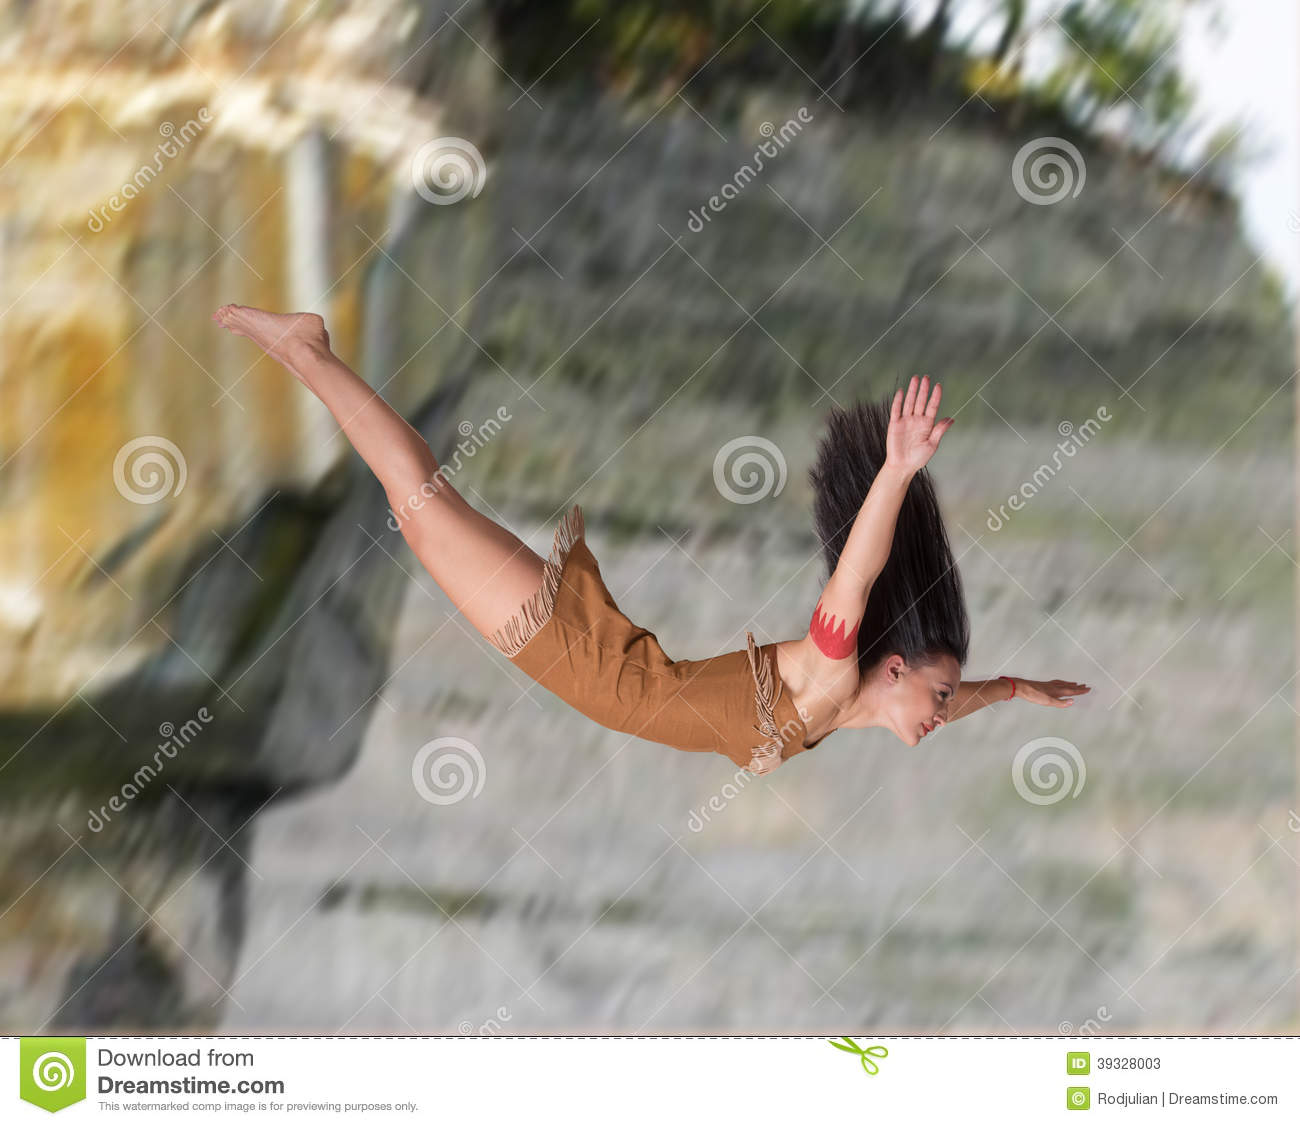 Girl Diving Off A Cliff Stock Photo   Image  39328003